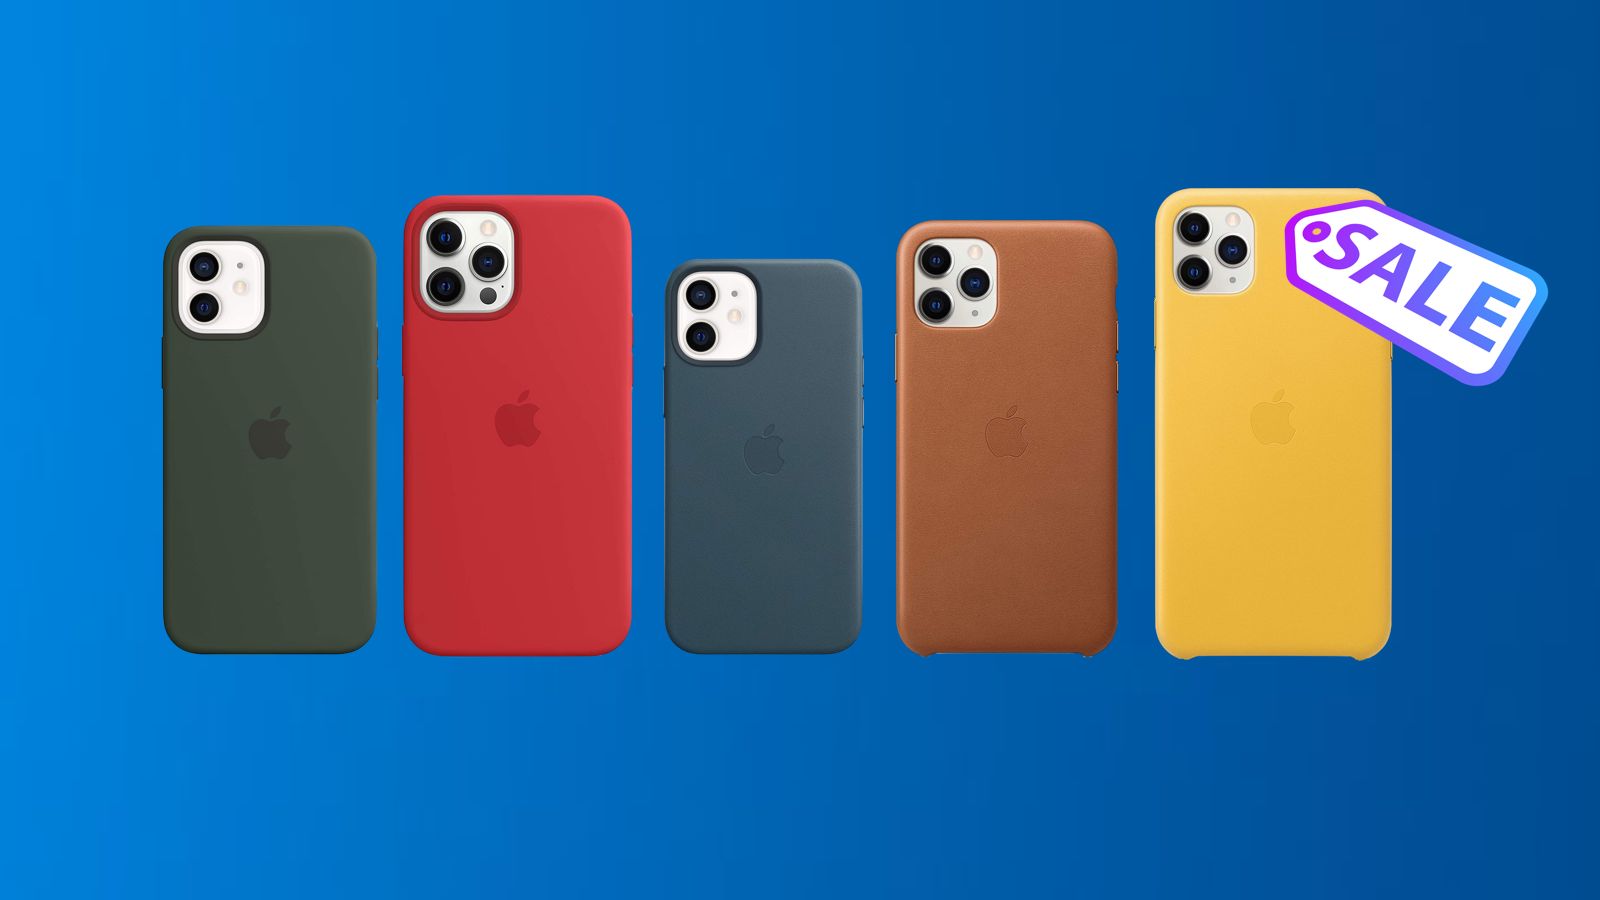 Deals: Not Upgrading to iPhone 13? Amazon Has Apple's Official iPhone 11 and iPhone 12 Cases for Up to $30 Off